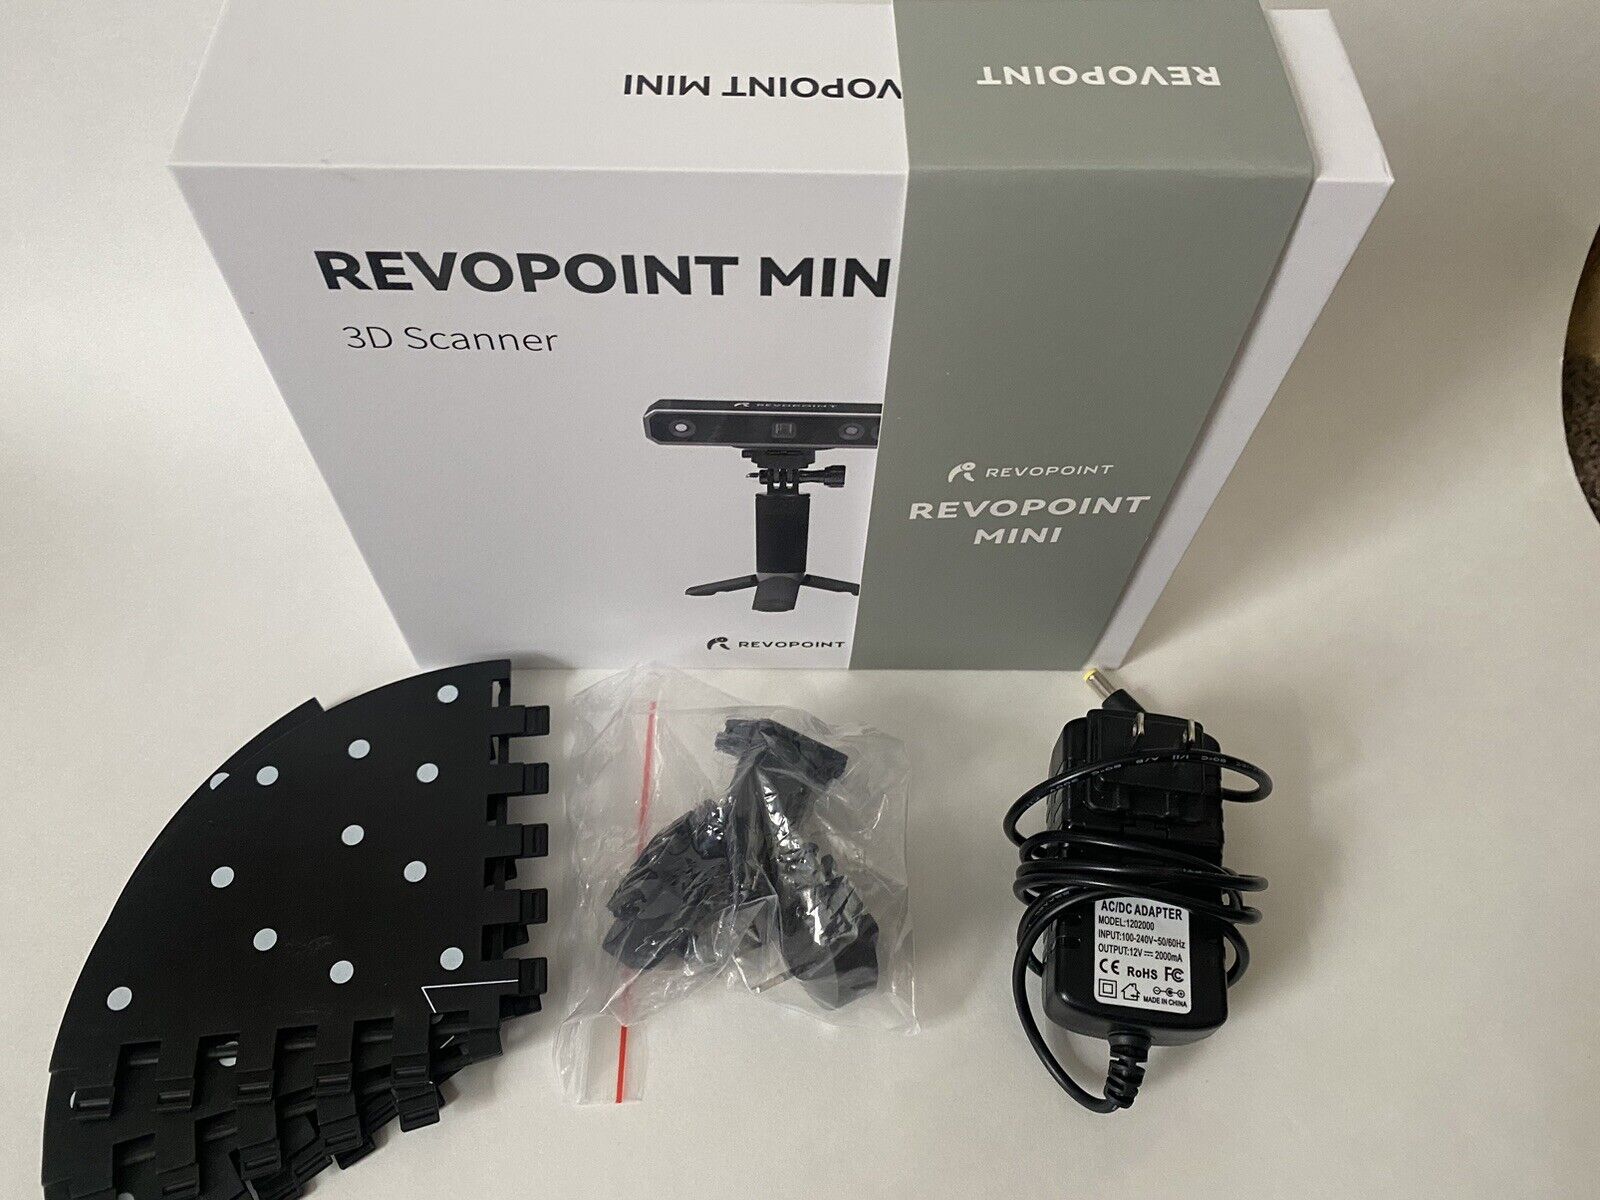 Revopoint MINI 3D Handheld Scanner with Dual-Axis Turntable, Excellent Condition